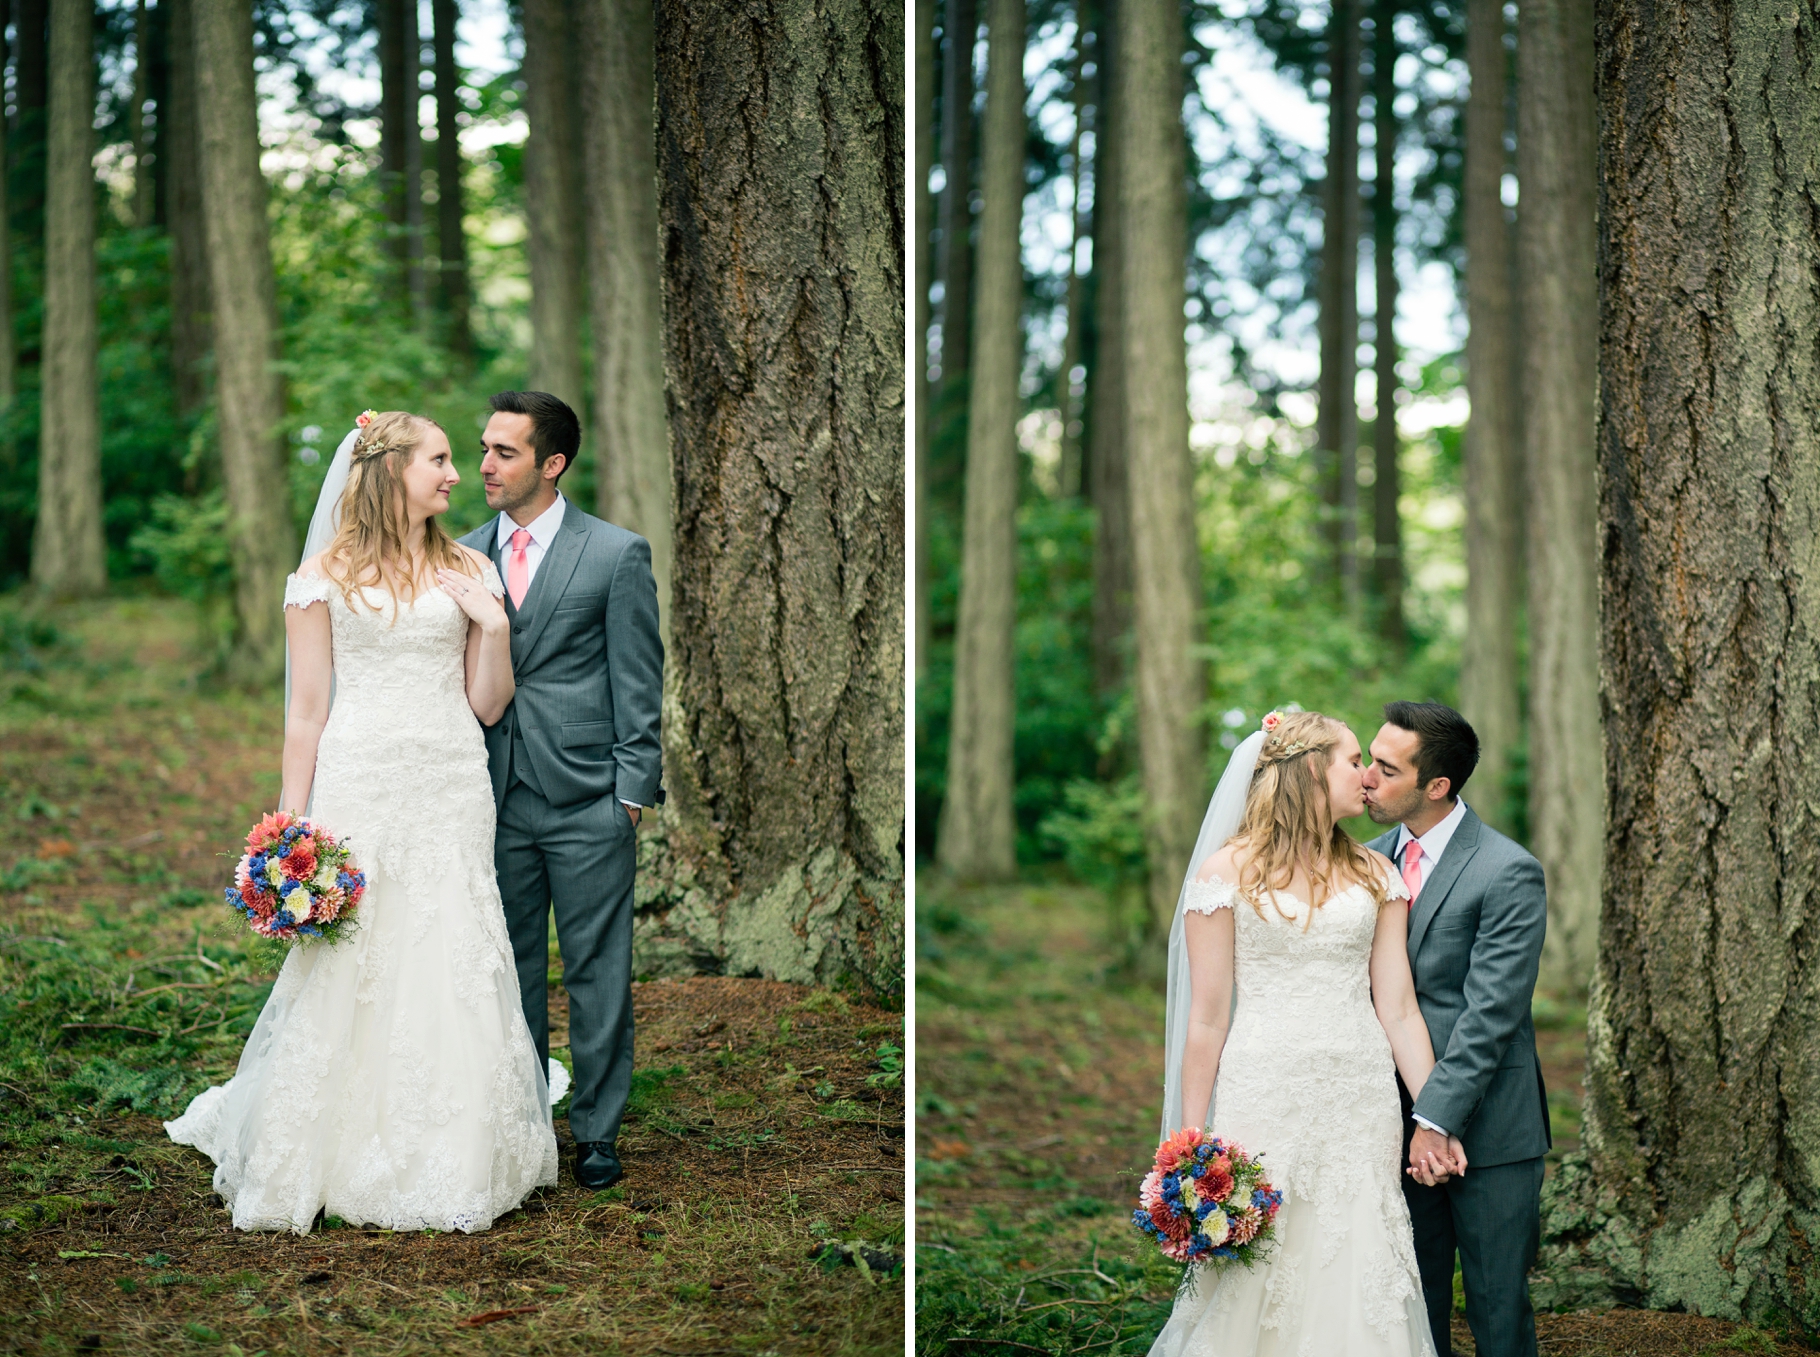 47-Bride-Groom-Portraits-Married-Bridal-Romantic-wooded-bluff-olympic-mountains-log-cabin-Kitsap-Memorial-State-Park-Forest-Northwest-Photographer-Seattle-Wedding-Photography-by-Betty-Elaine